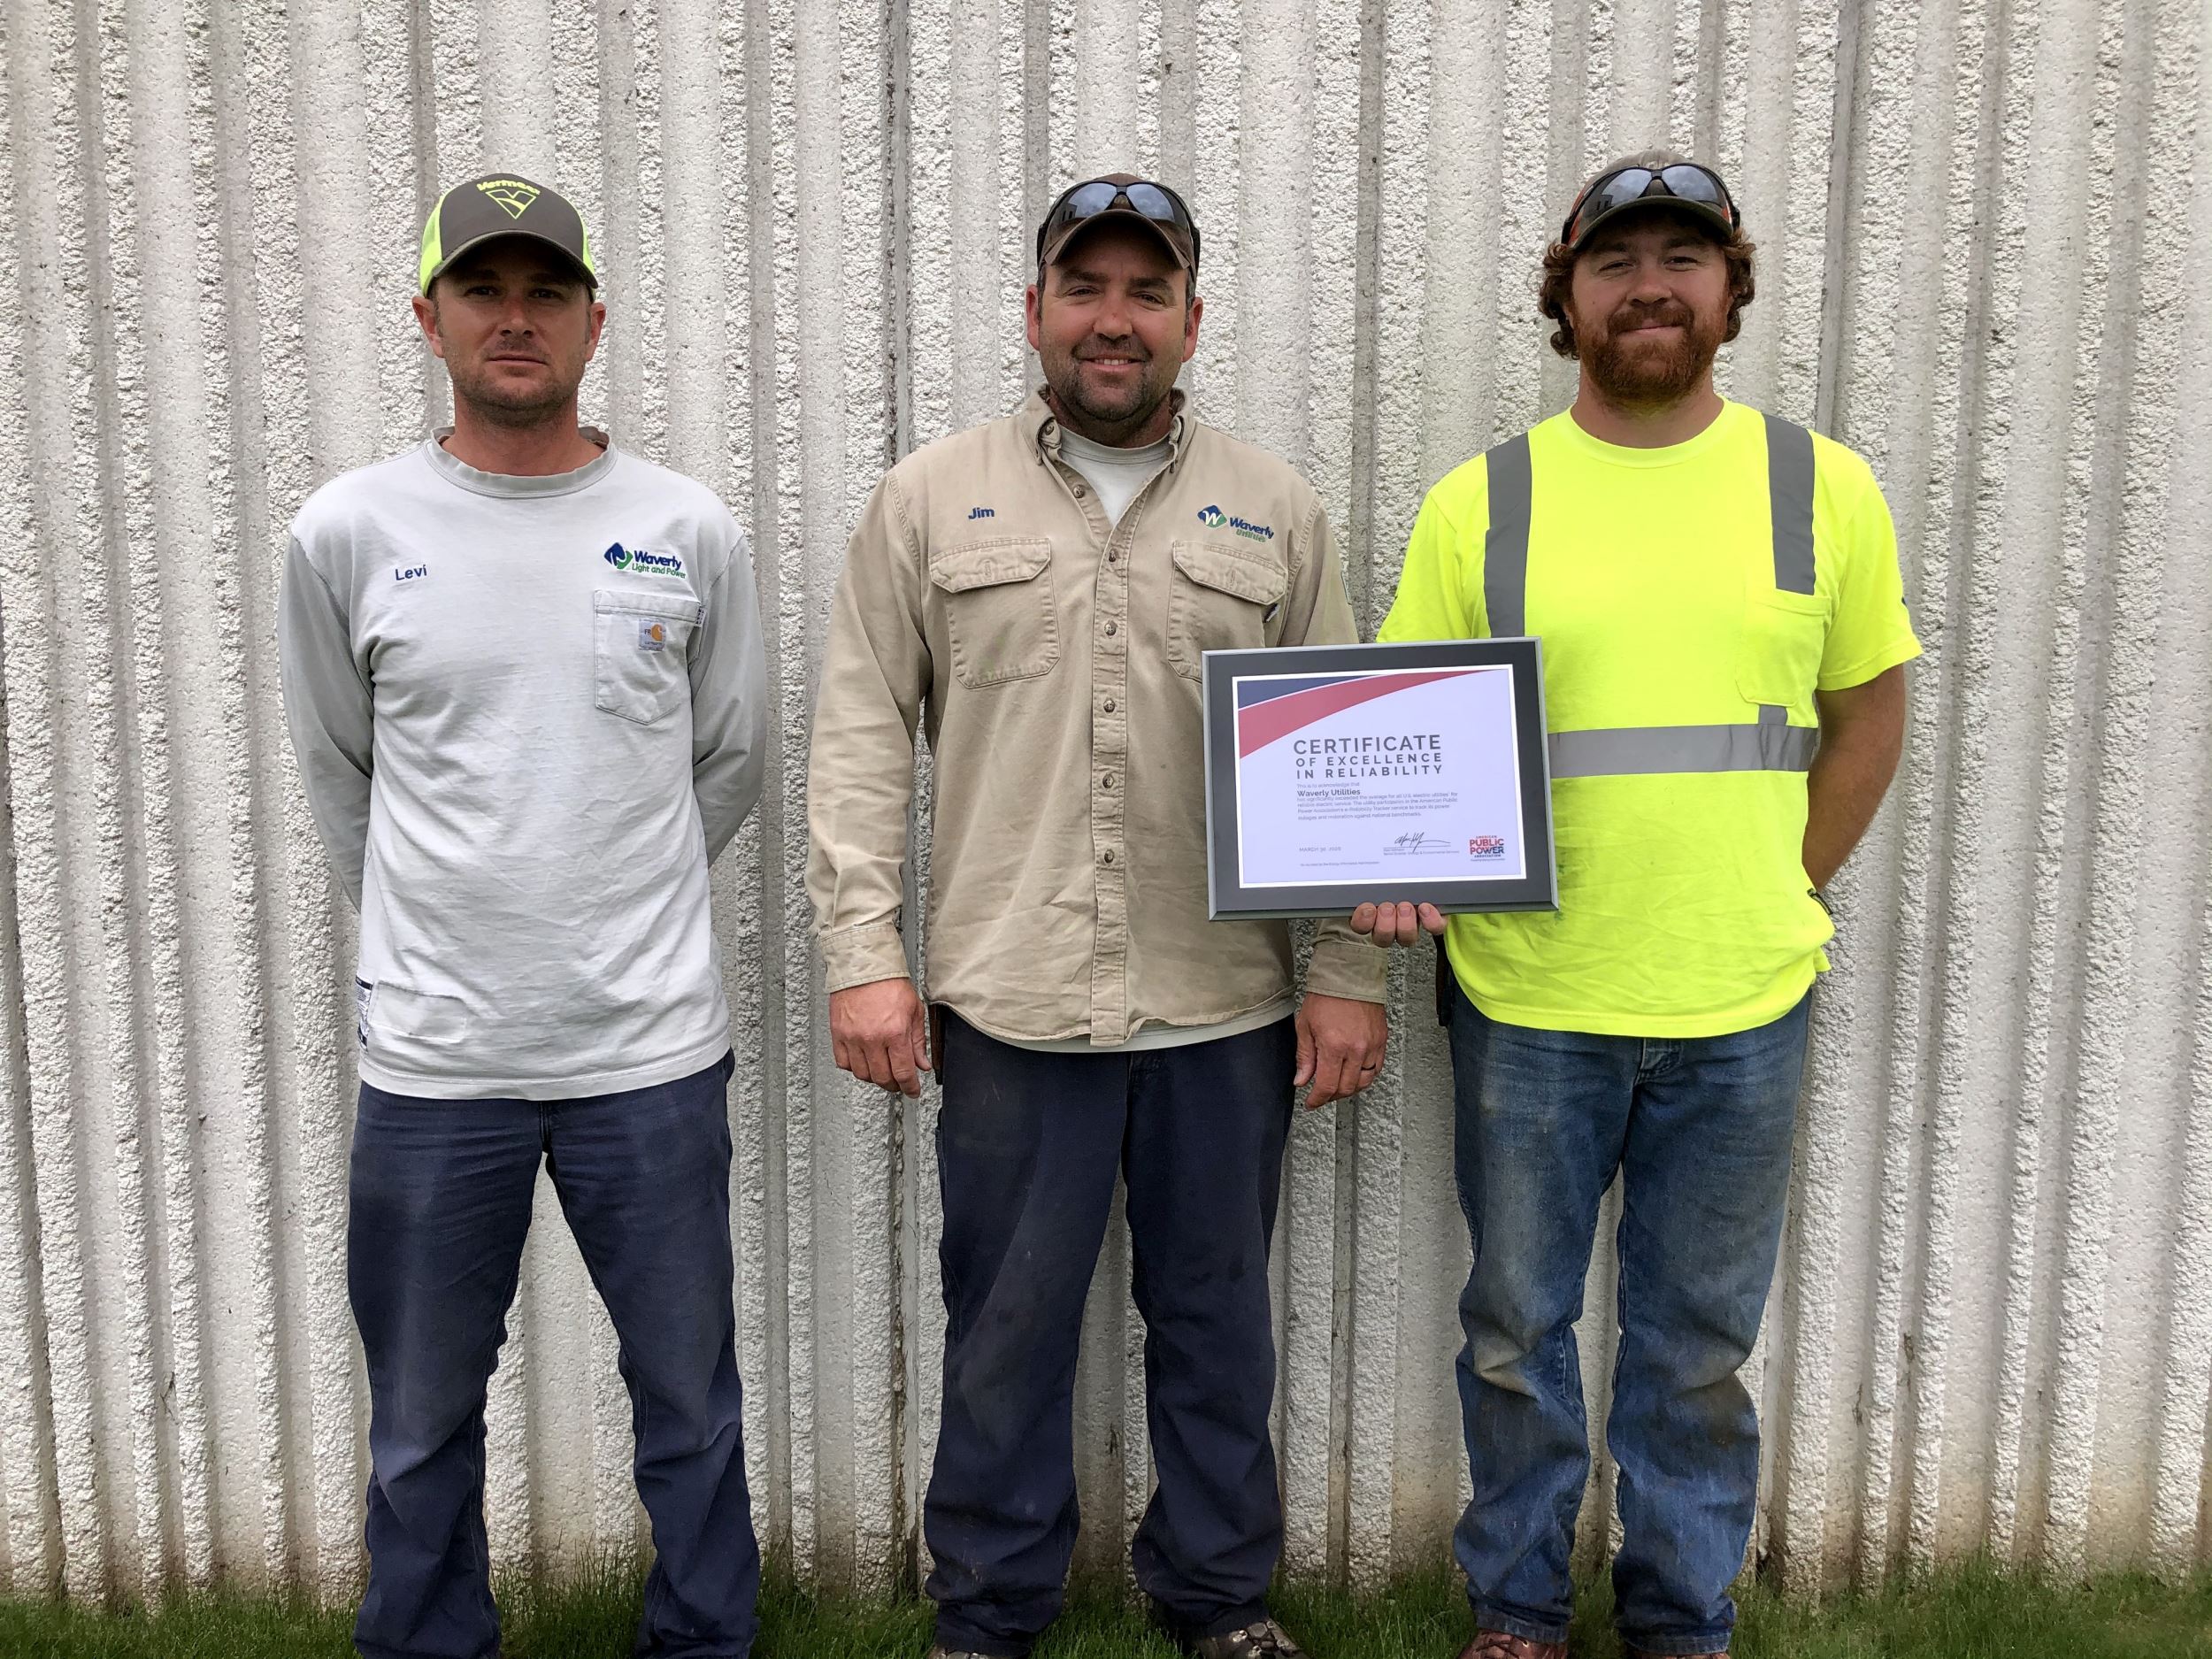 Levi Gulick, Jim Baumgartner, and Shawn Miller, with the reliability award